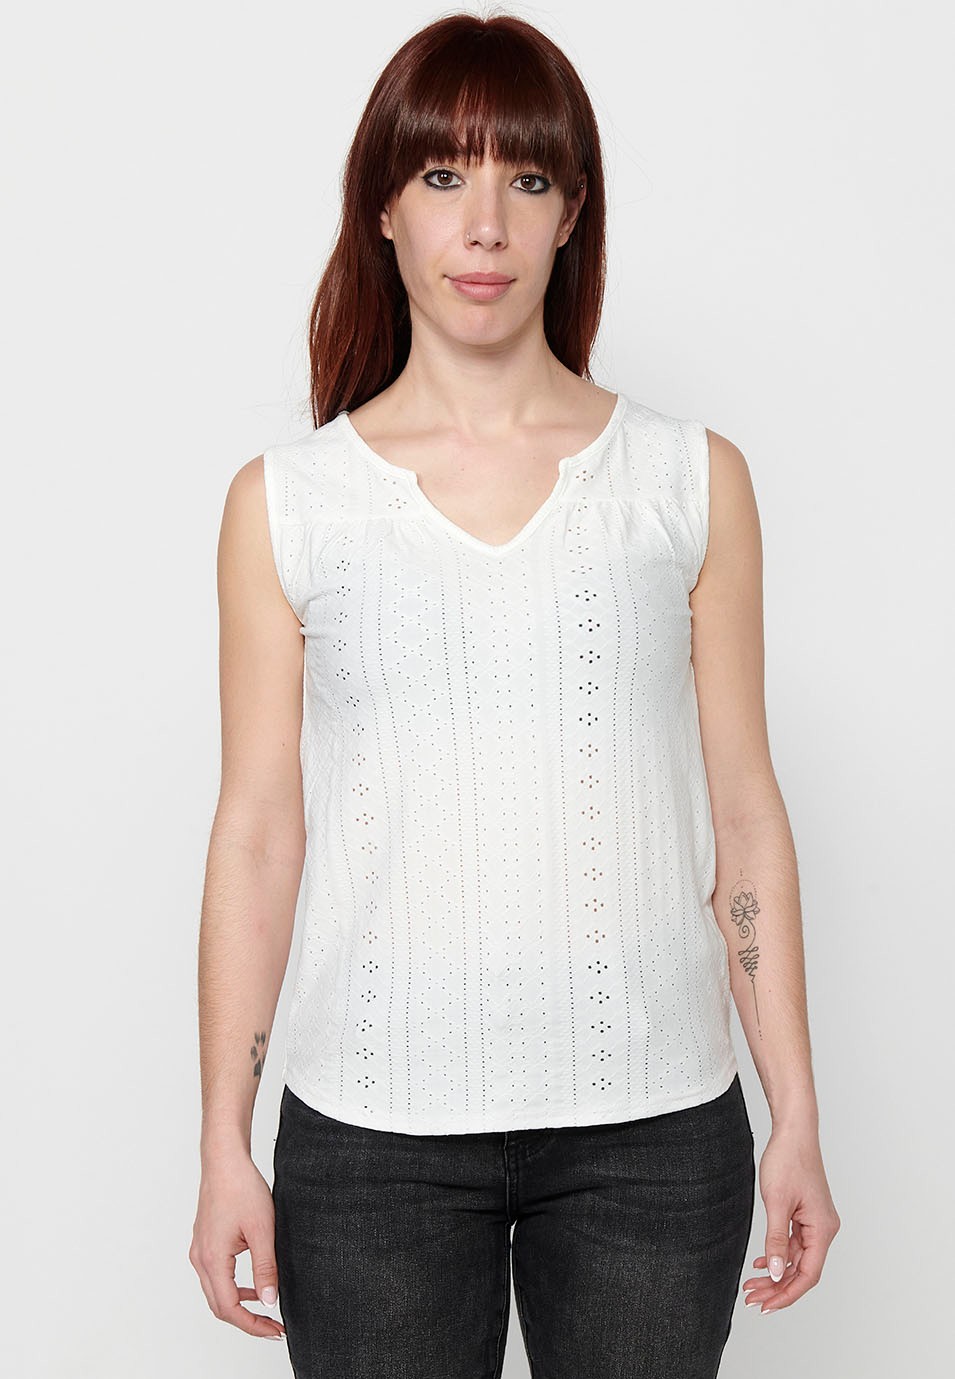 Sleeveless T-shirt, round neck with white opening for women 1